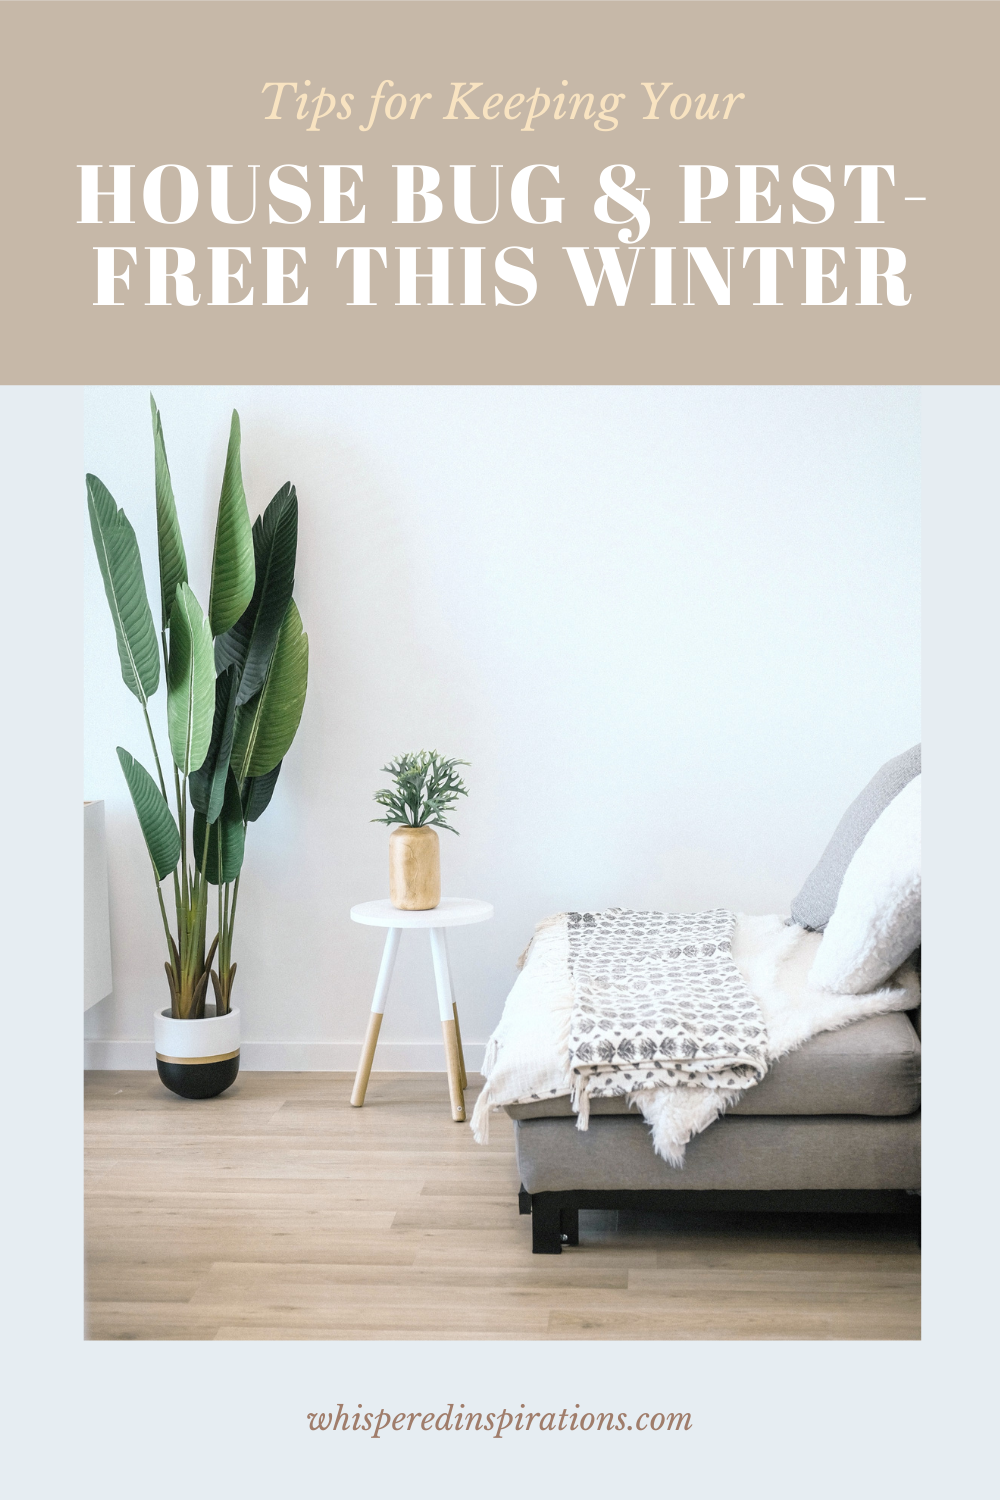 A bohemian styled living room to show a pest-free home. This article provides tips for keeping your house pest-free this winter. A banner reads, "How to Keep Your Home Bug and Pest-Free This Winter."